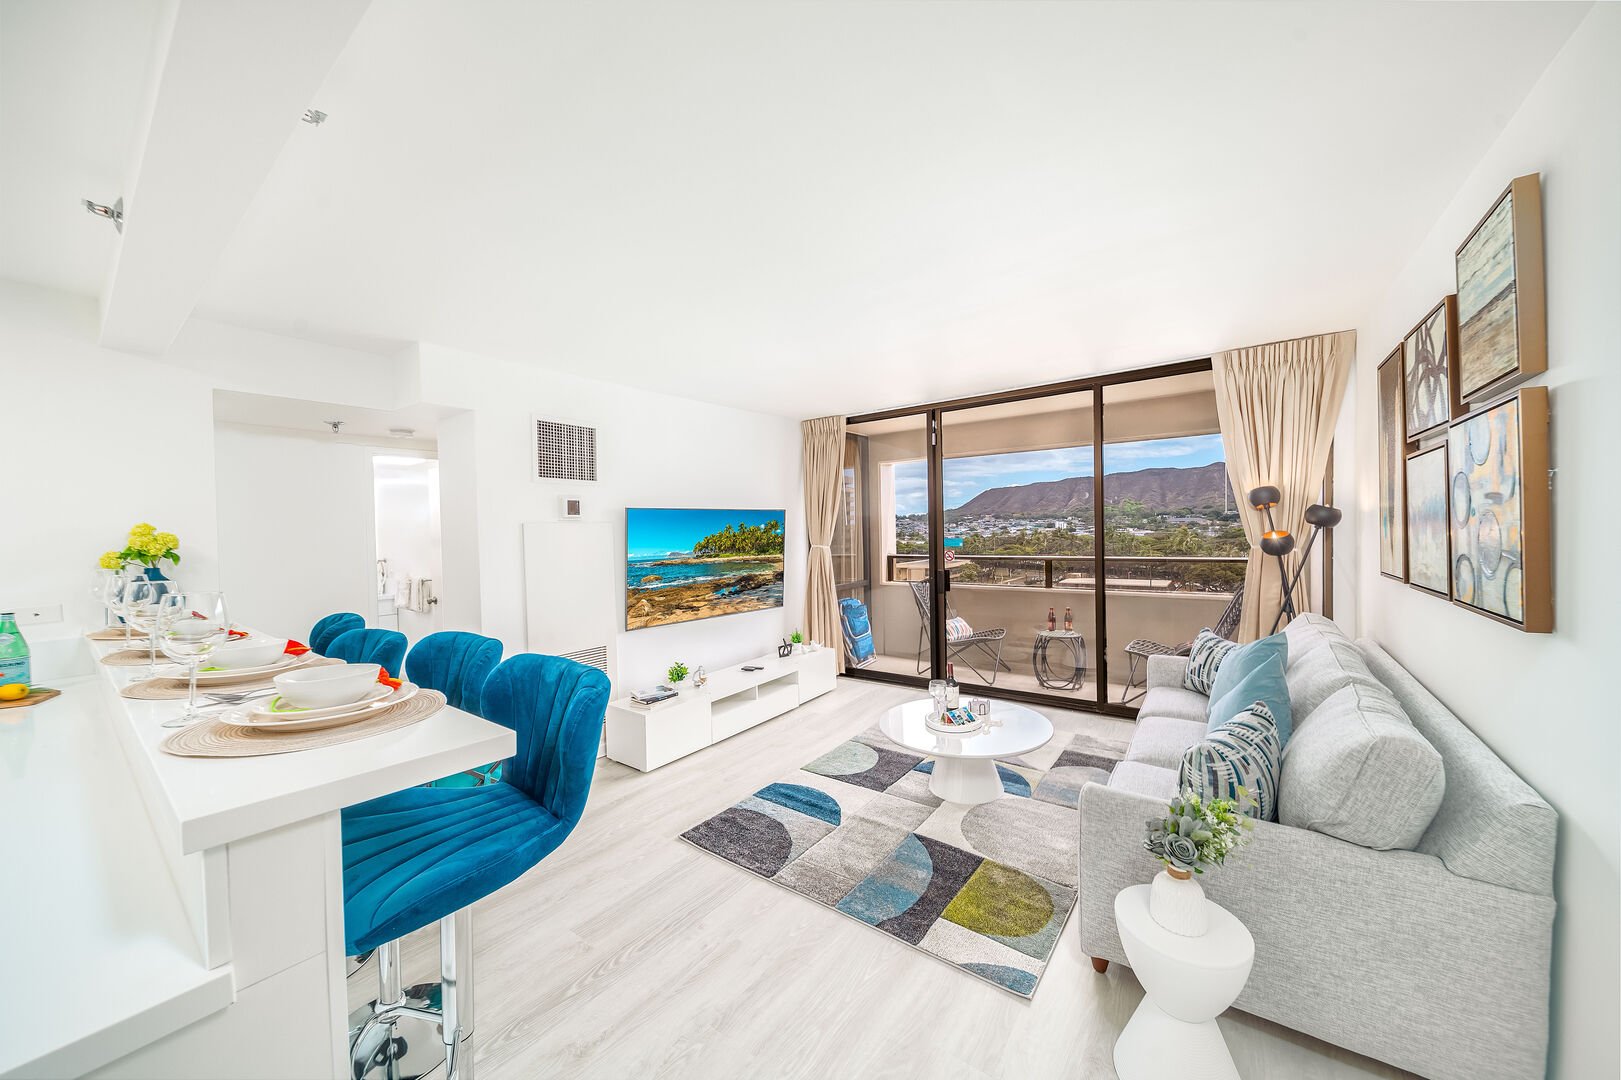 Have a relaxing stay in your recently renovated beautiful condo with a stunning Diamond Head View from your kitchen, living room, and balcony.